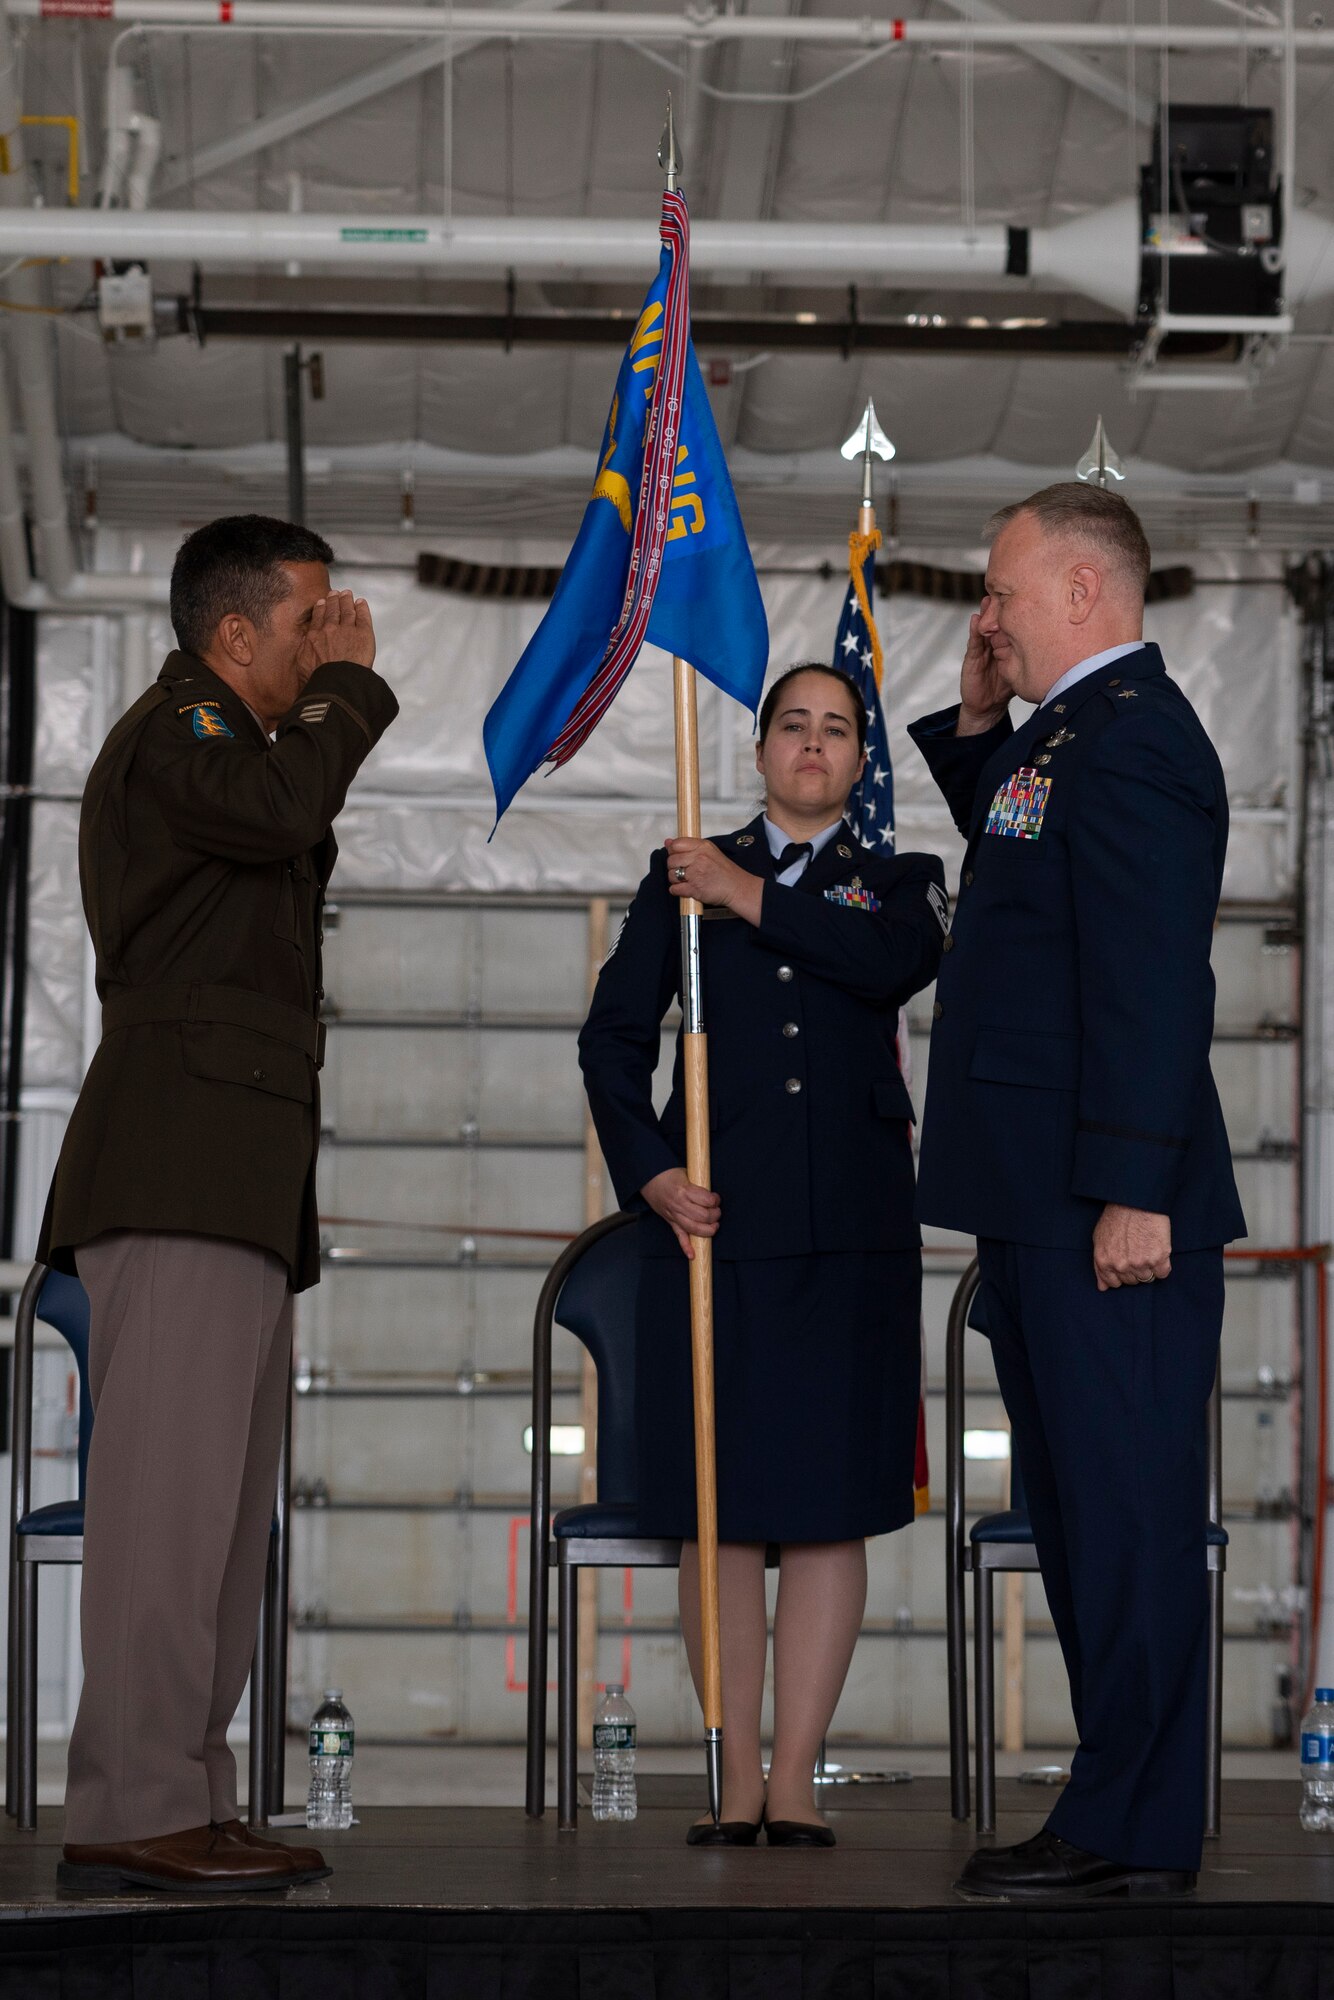 Maj. Gen. David Mikolaities, New Hampshire Adjutant General, receives a salute from Brig. Gen. John Pogorek during a ceremony June 4, 2022, at Pease Air National Guard Base, N.H. During the three-part ceremony, Pogorek passed command of the 157th Air Refueling Wing to Col. Nelson Perron, was promoted to the rank of brigadier general, and then assumed command of the New Hampshire Air National Guard. (U.S. Air National Guard photo by Staff Sgt. Taylor Queen)